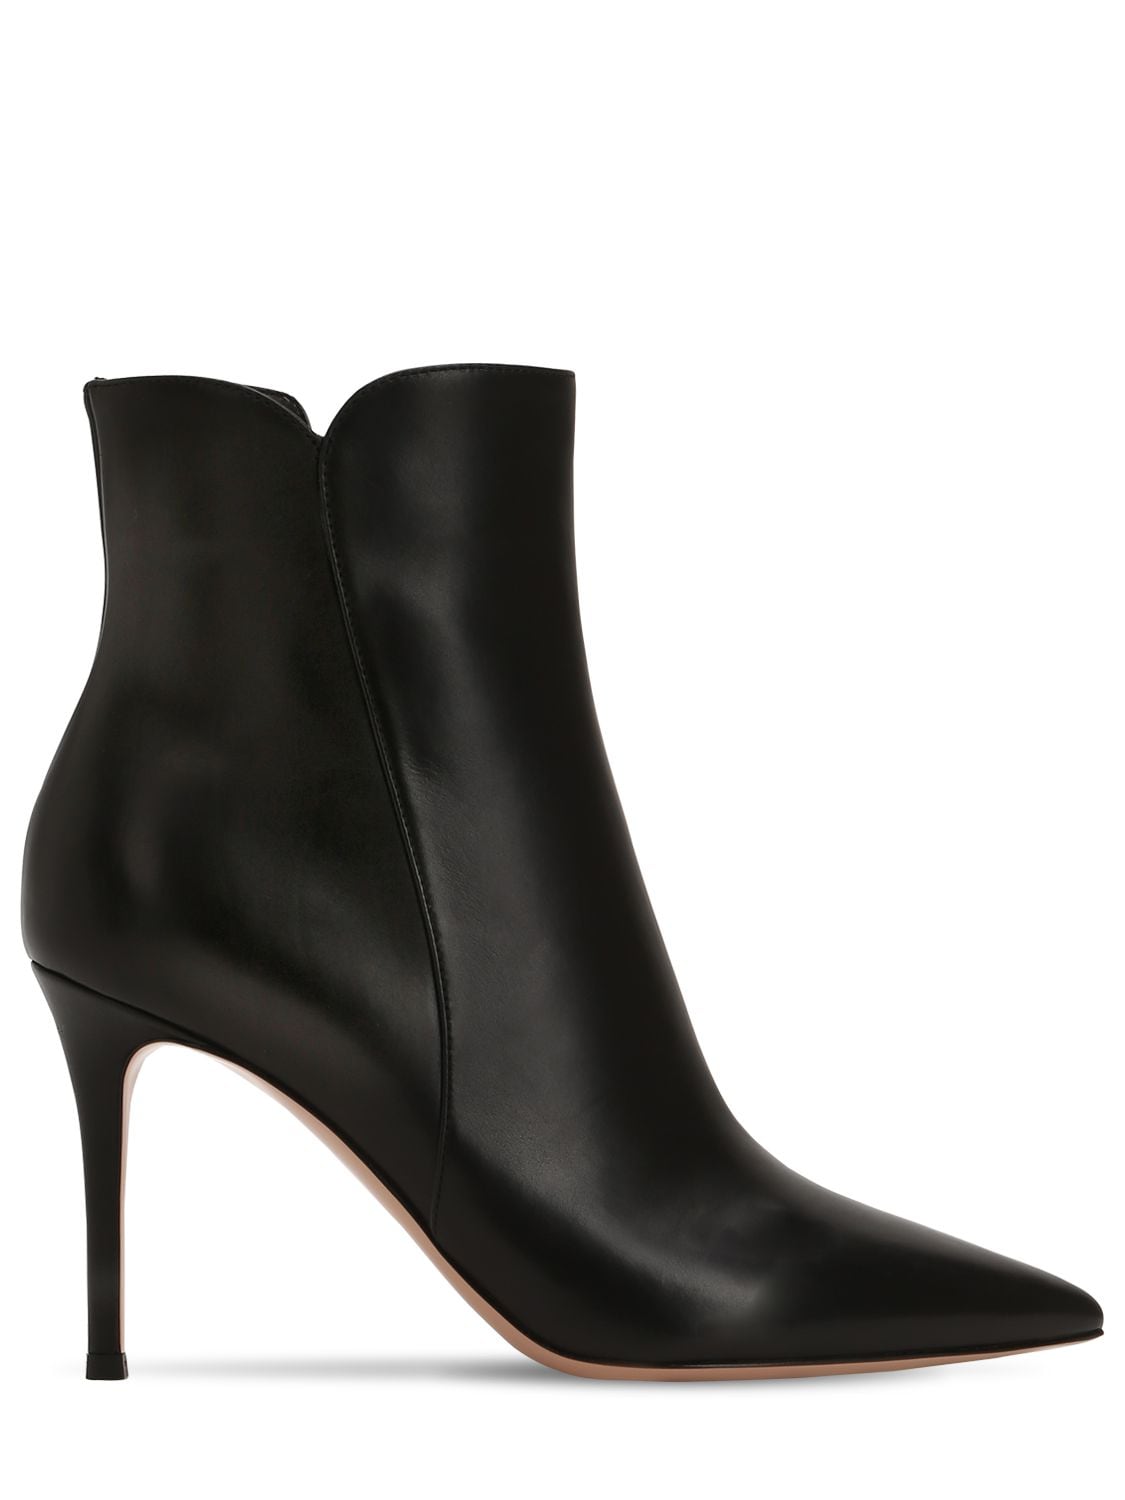 GIANVITO ROSSI 85MM LEVY LEATHER ANKLE BOOTS,68IAI4002-TKVSTW2